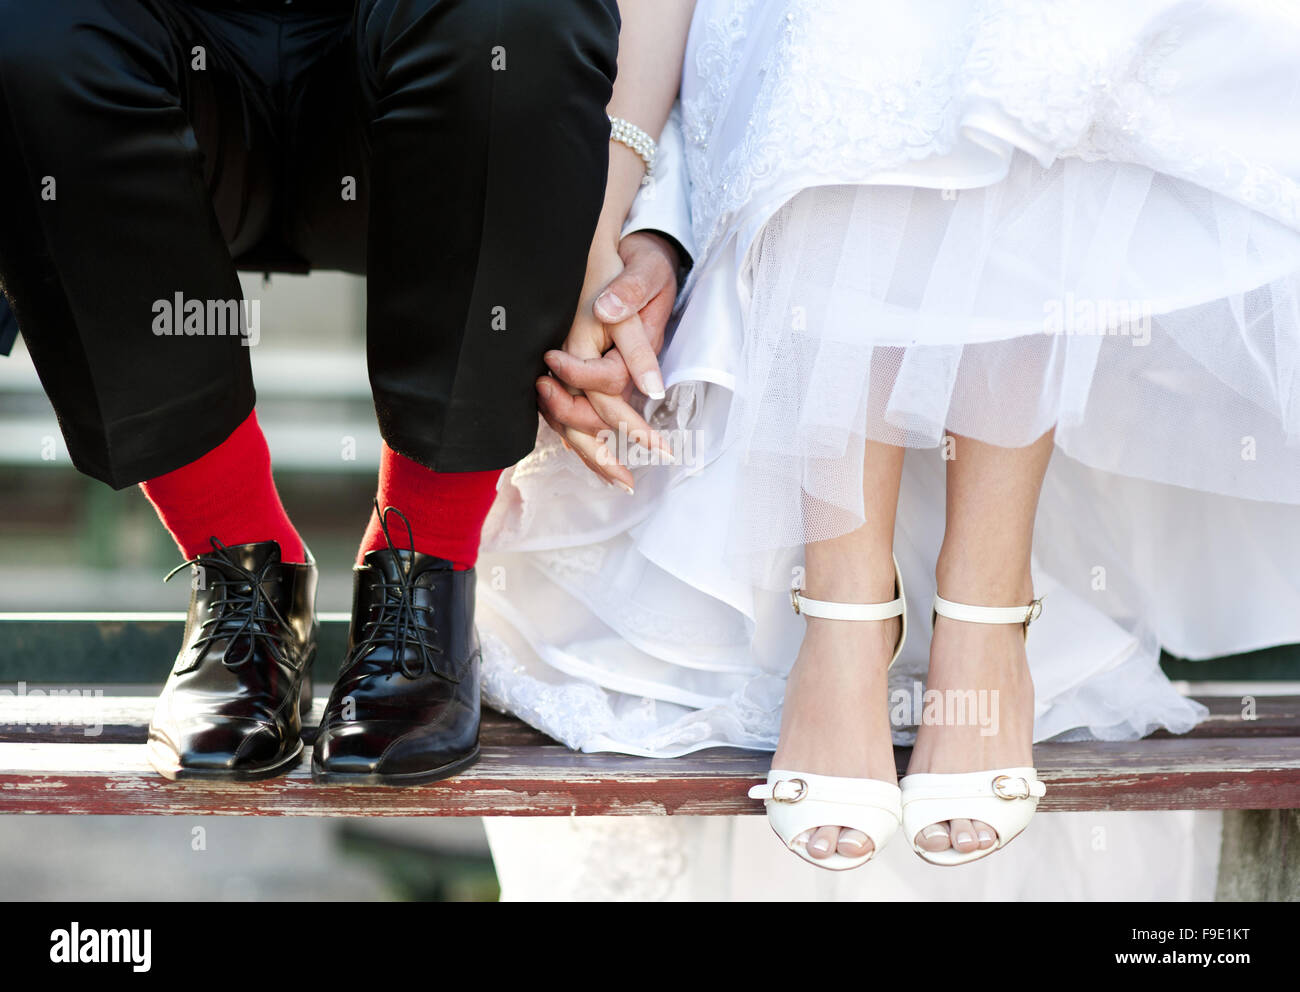 Groom's funny feet with love sign on red socks. Stock Photo